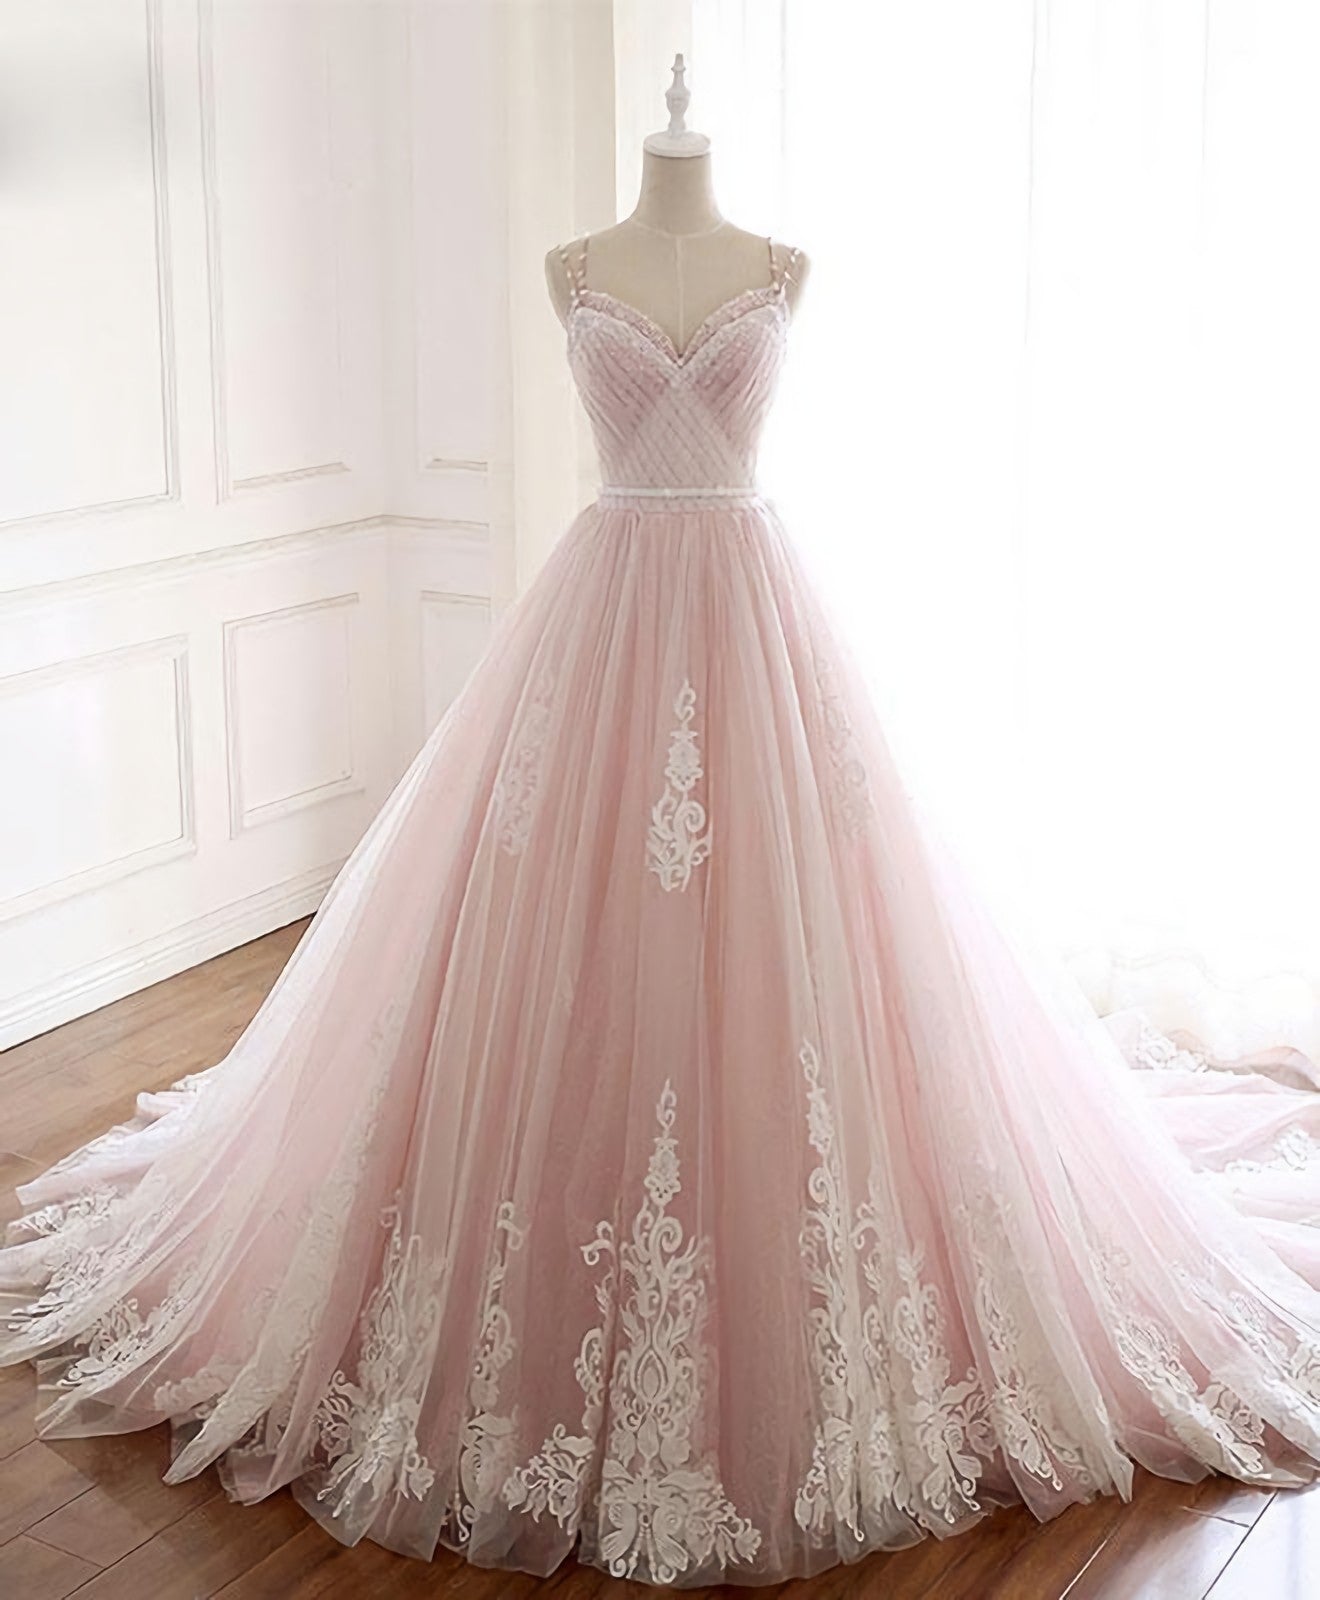 Pink Sweetheart Lace Tulle Long Corset Prom Dress, Lace Pink Evening Dress outfit, Homecoming Dresses Style